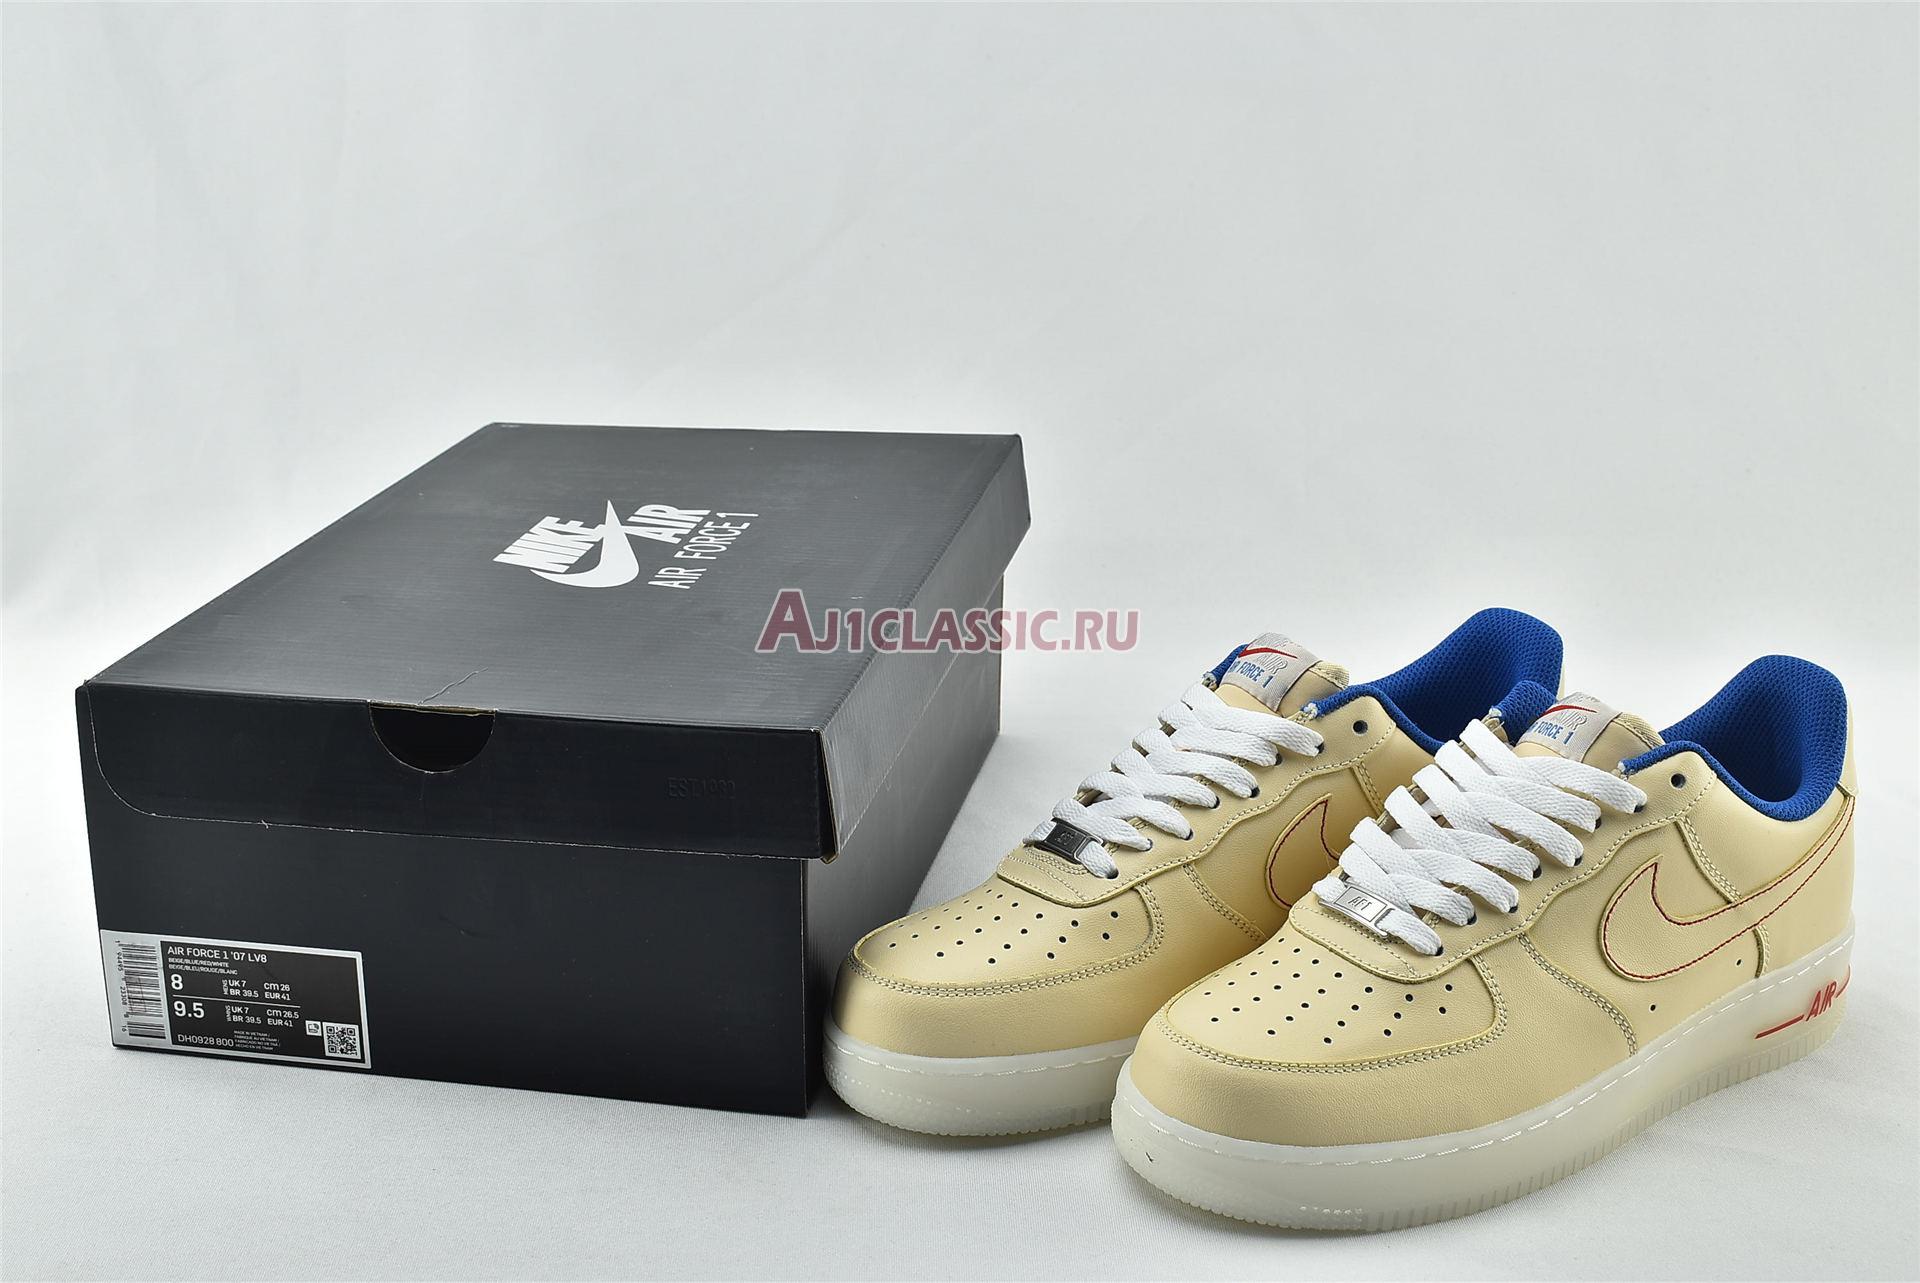 Nike Air Force 1 Low 07 LV8 Ice Sole DH0928-800 Guava Ice/Guava Ice/Game Royal Sneakers